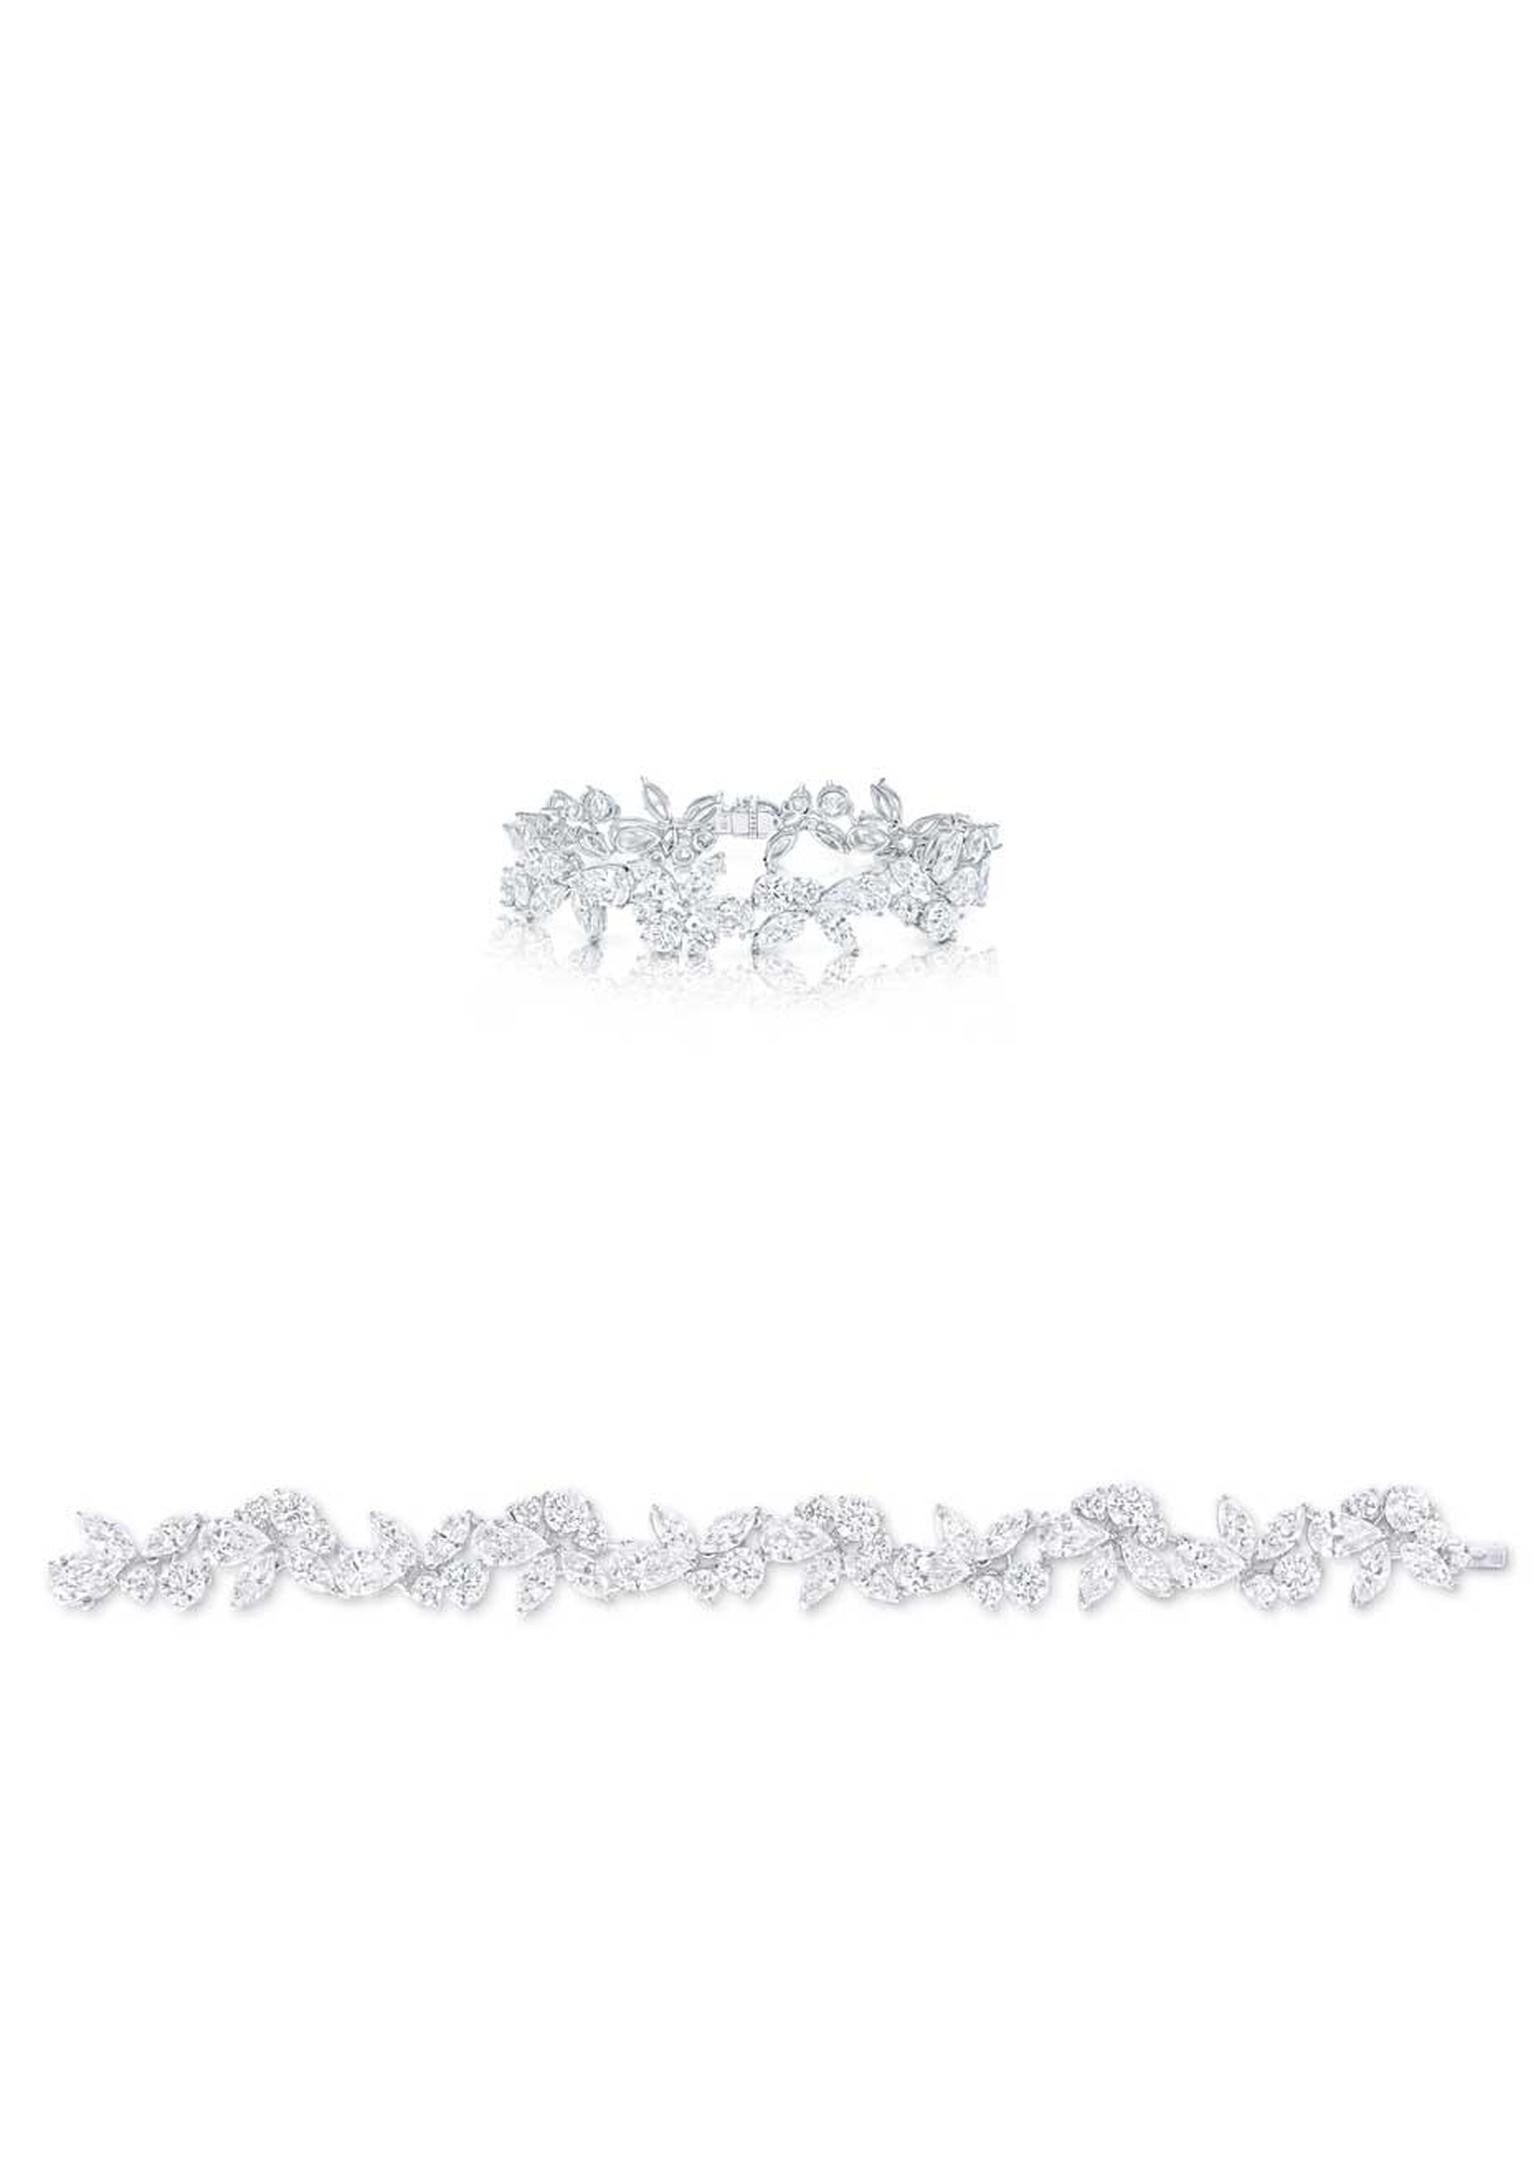 Graff Rhythm collection platinum bracelet featuring brilliant, pear and marquise-shaped diamonds